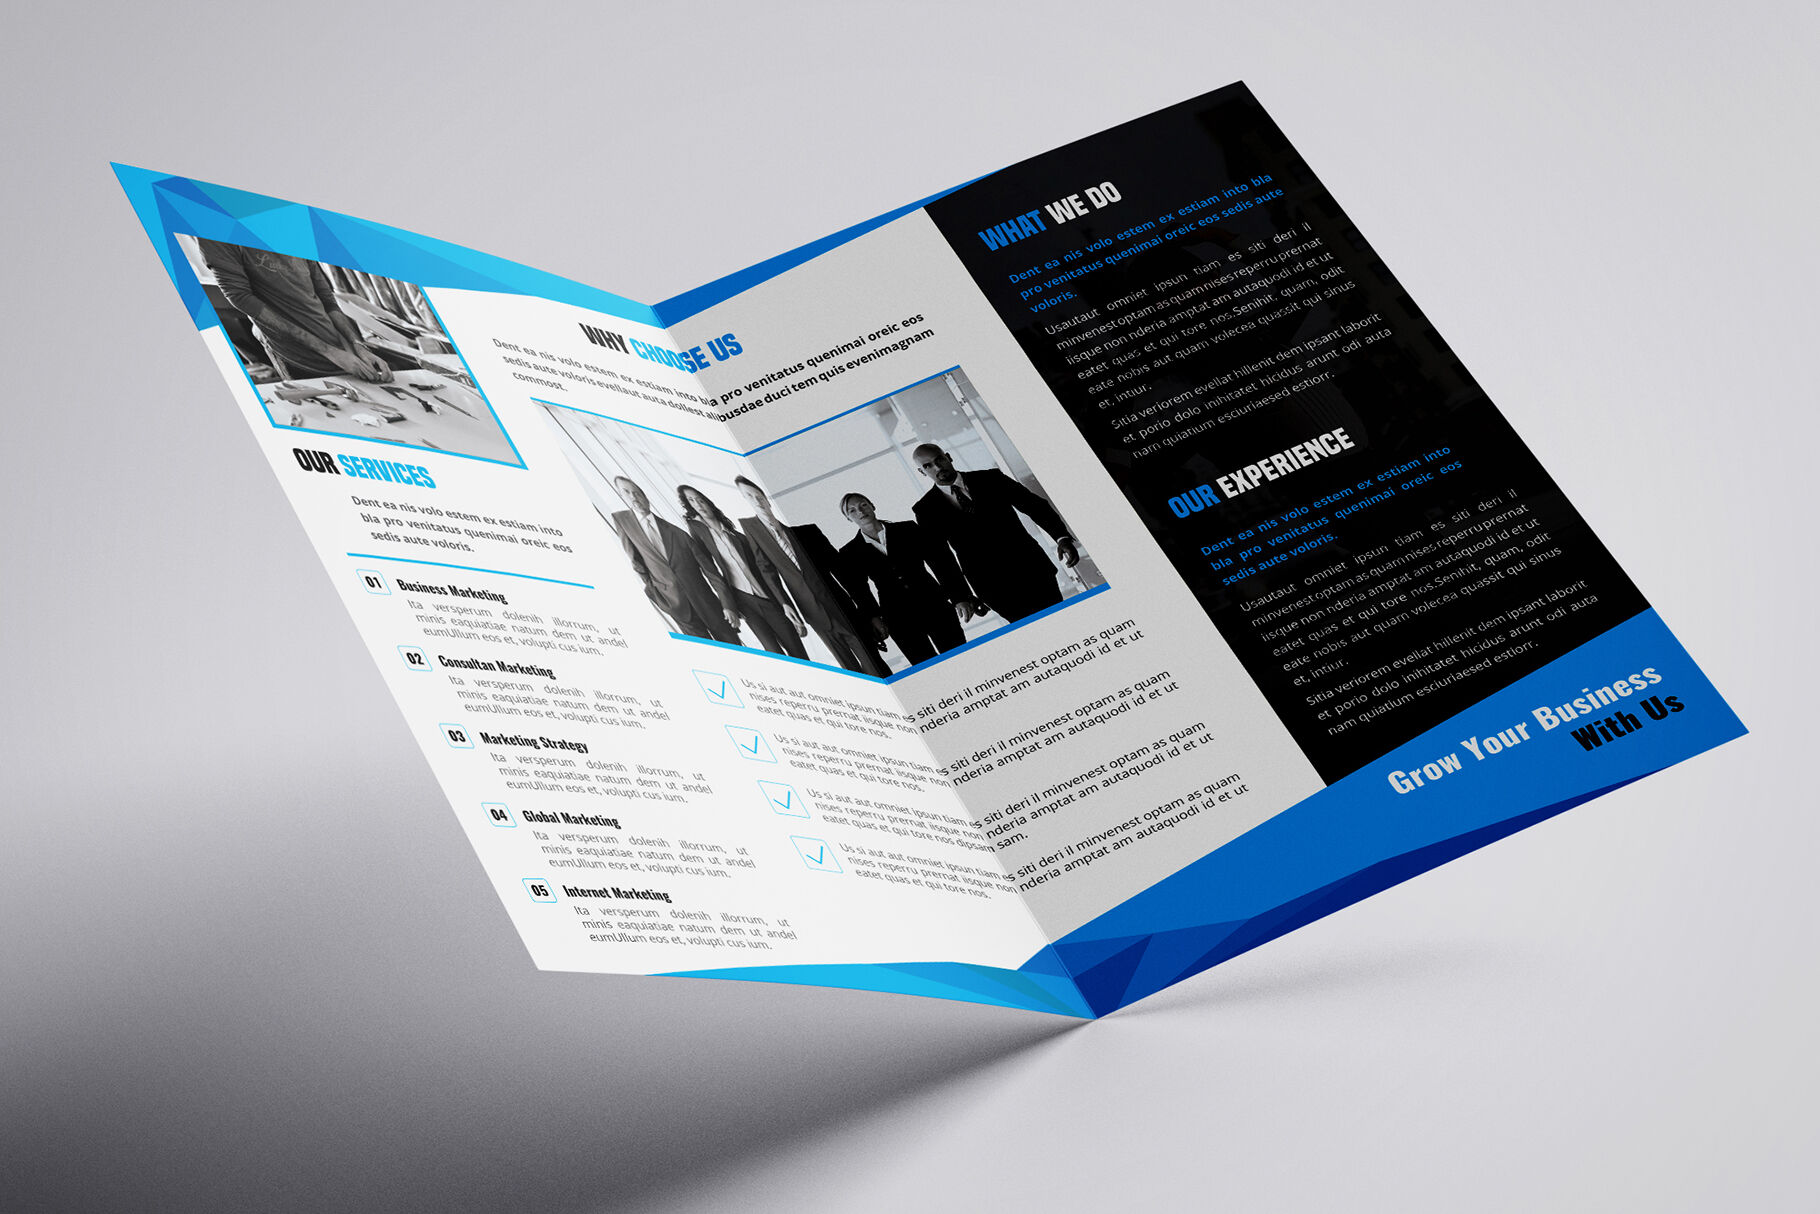 Byfold - A23 Company Profile Bifold Brochure Template By StringLabs Pertaining To Bi Fold Menu Template